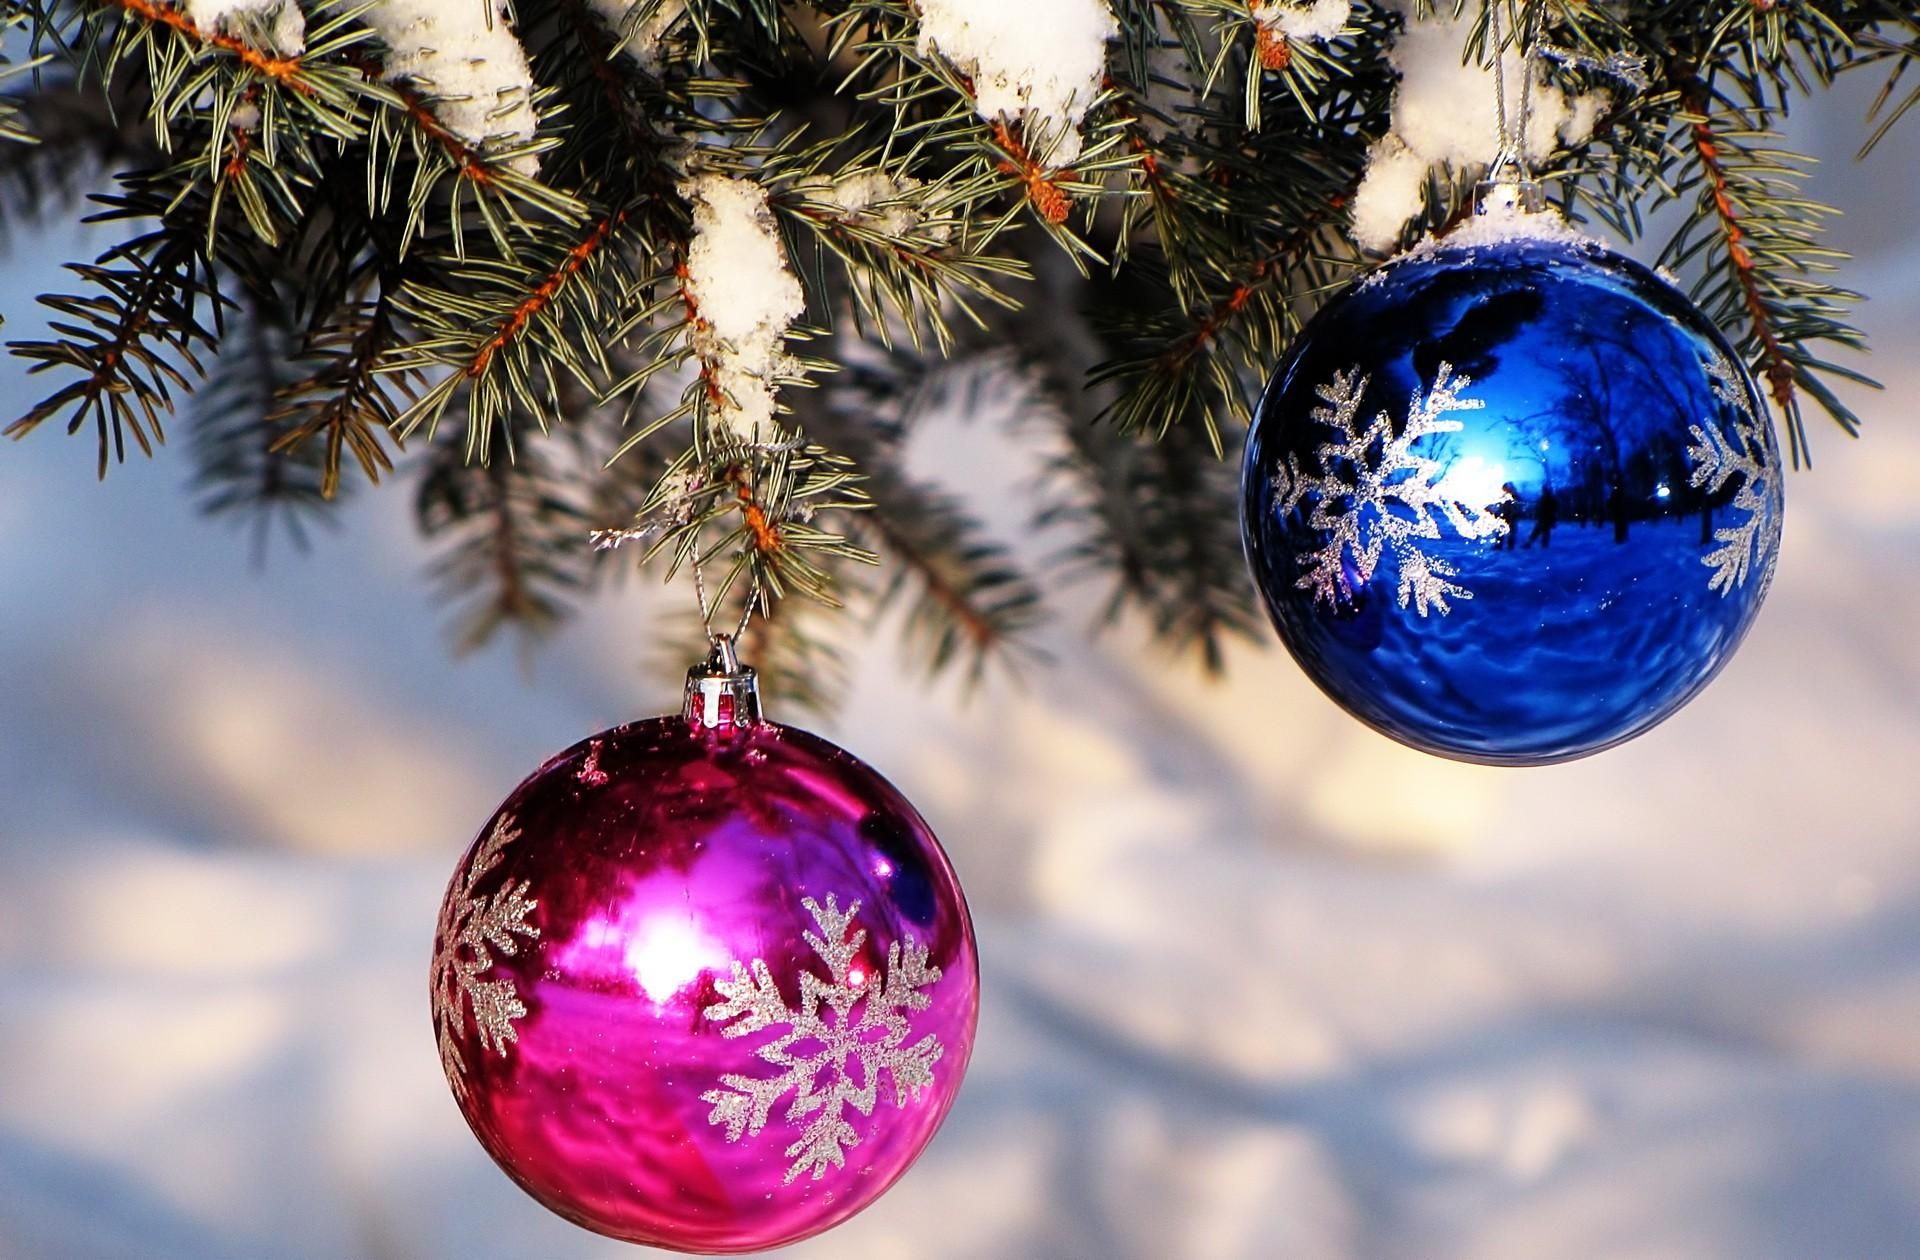 Download wallpaper 1920x1260 christmas decorations, balloons, blue, pink, spruce, snow HD background